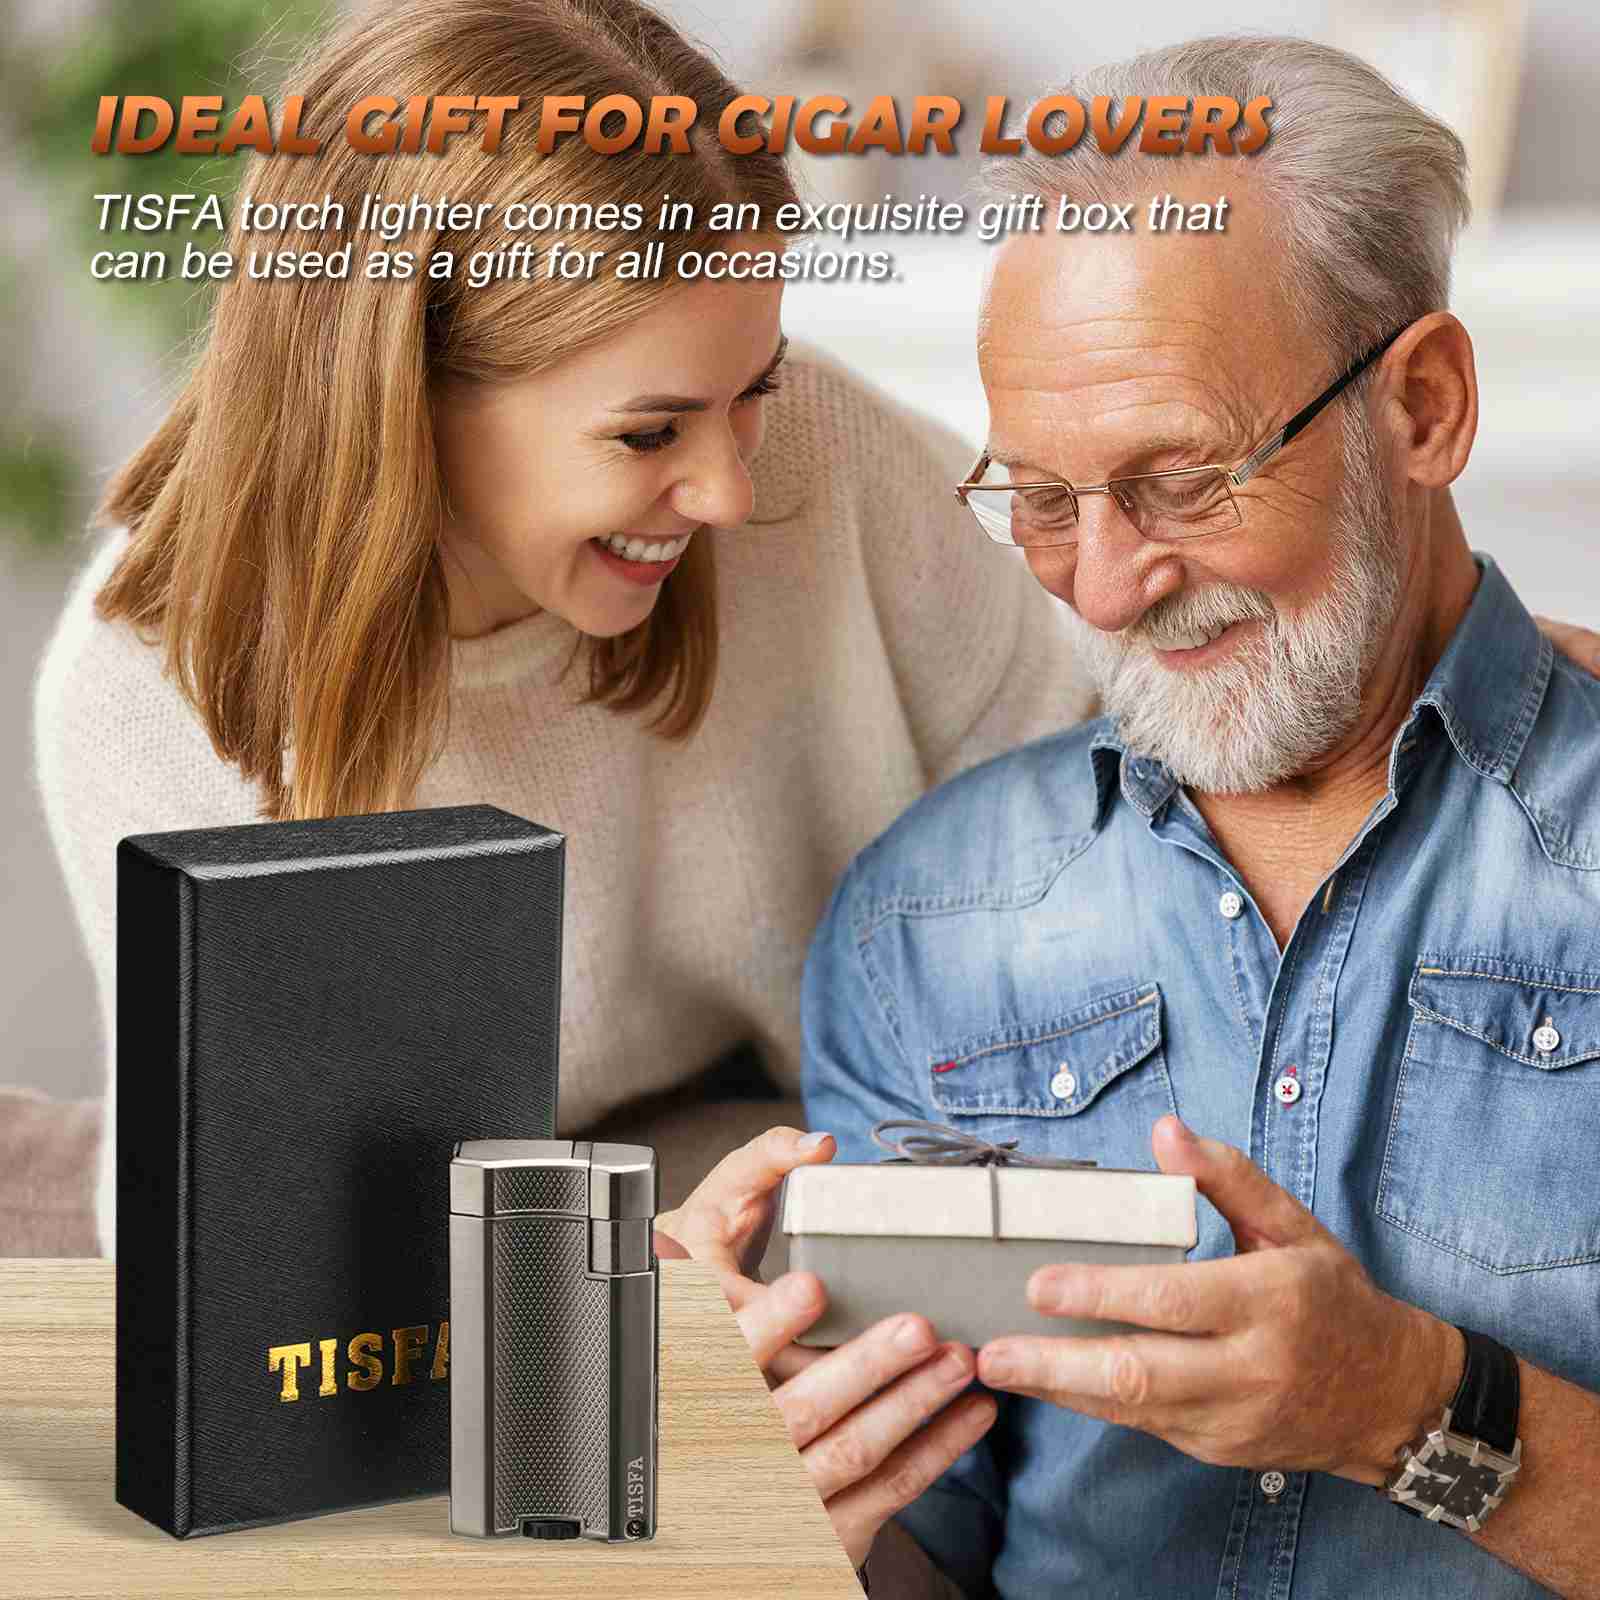 Unique refillable lighter an ideal gift for stylish men